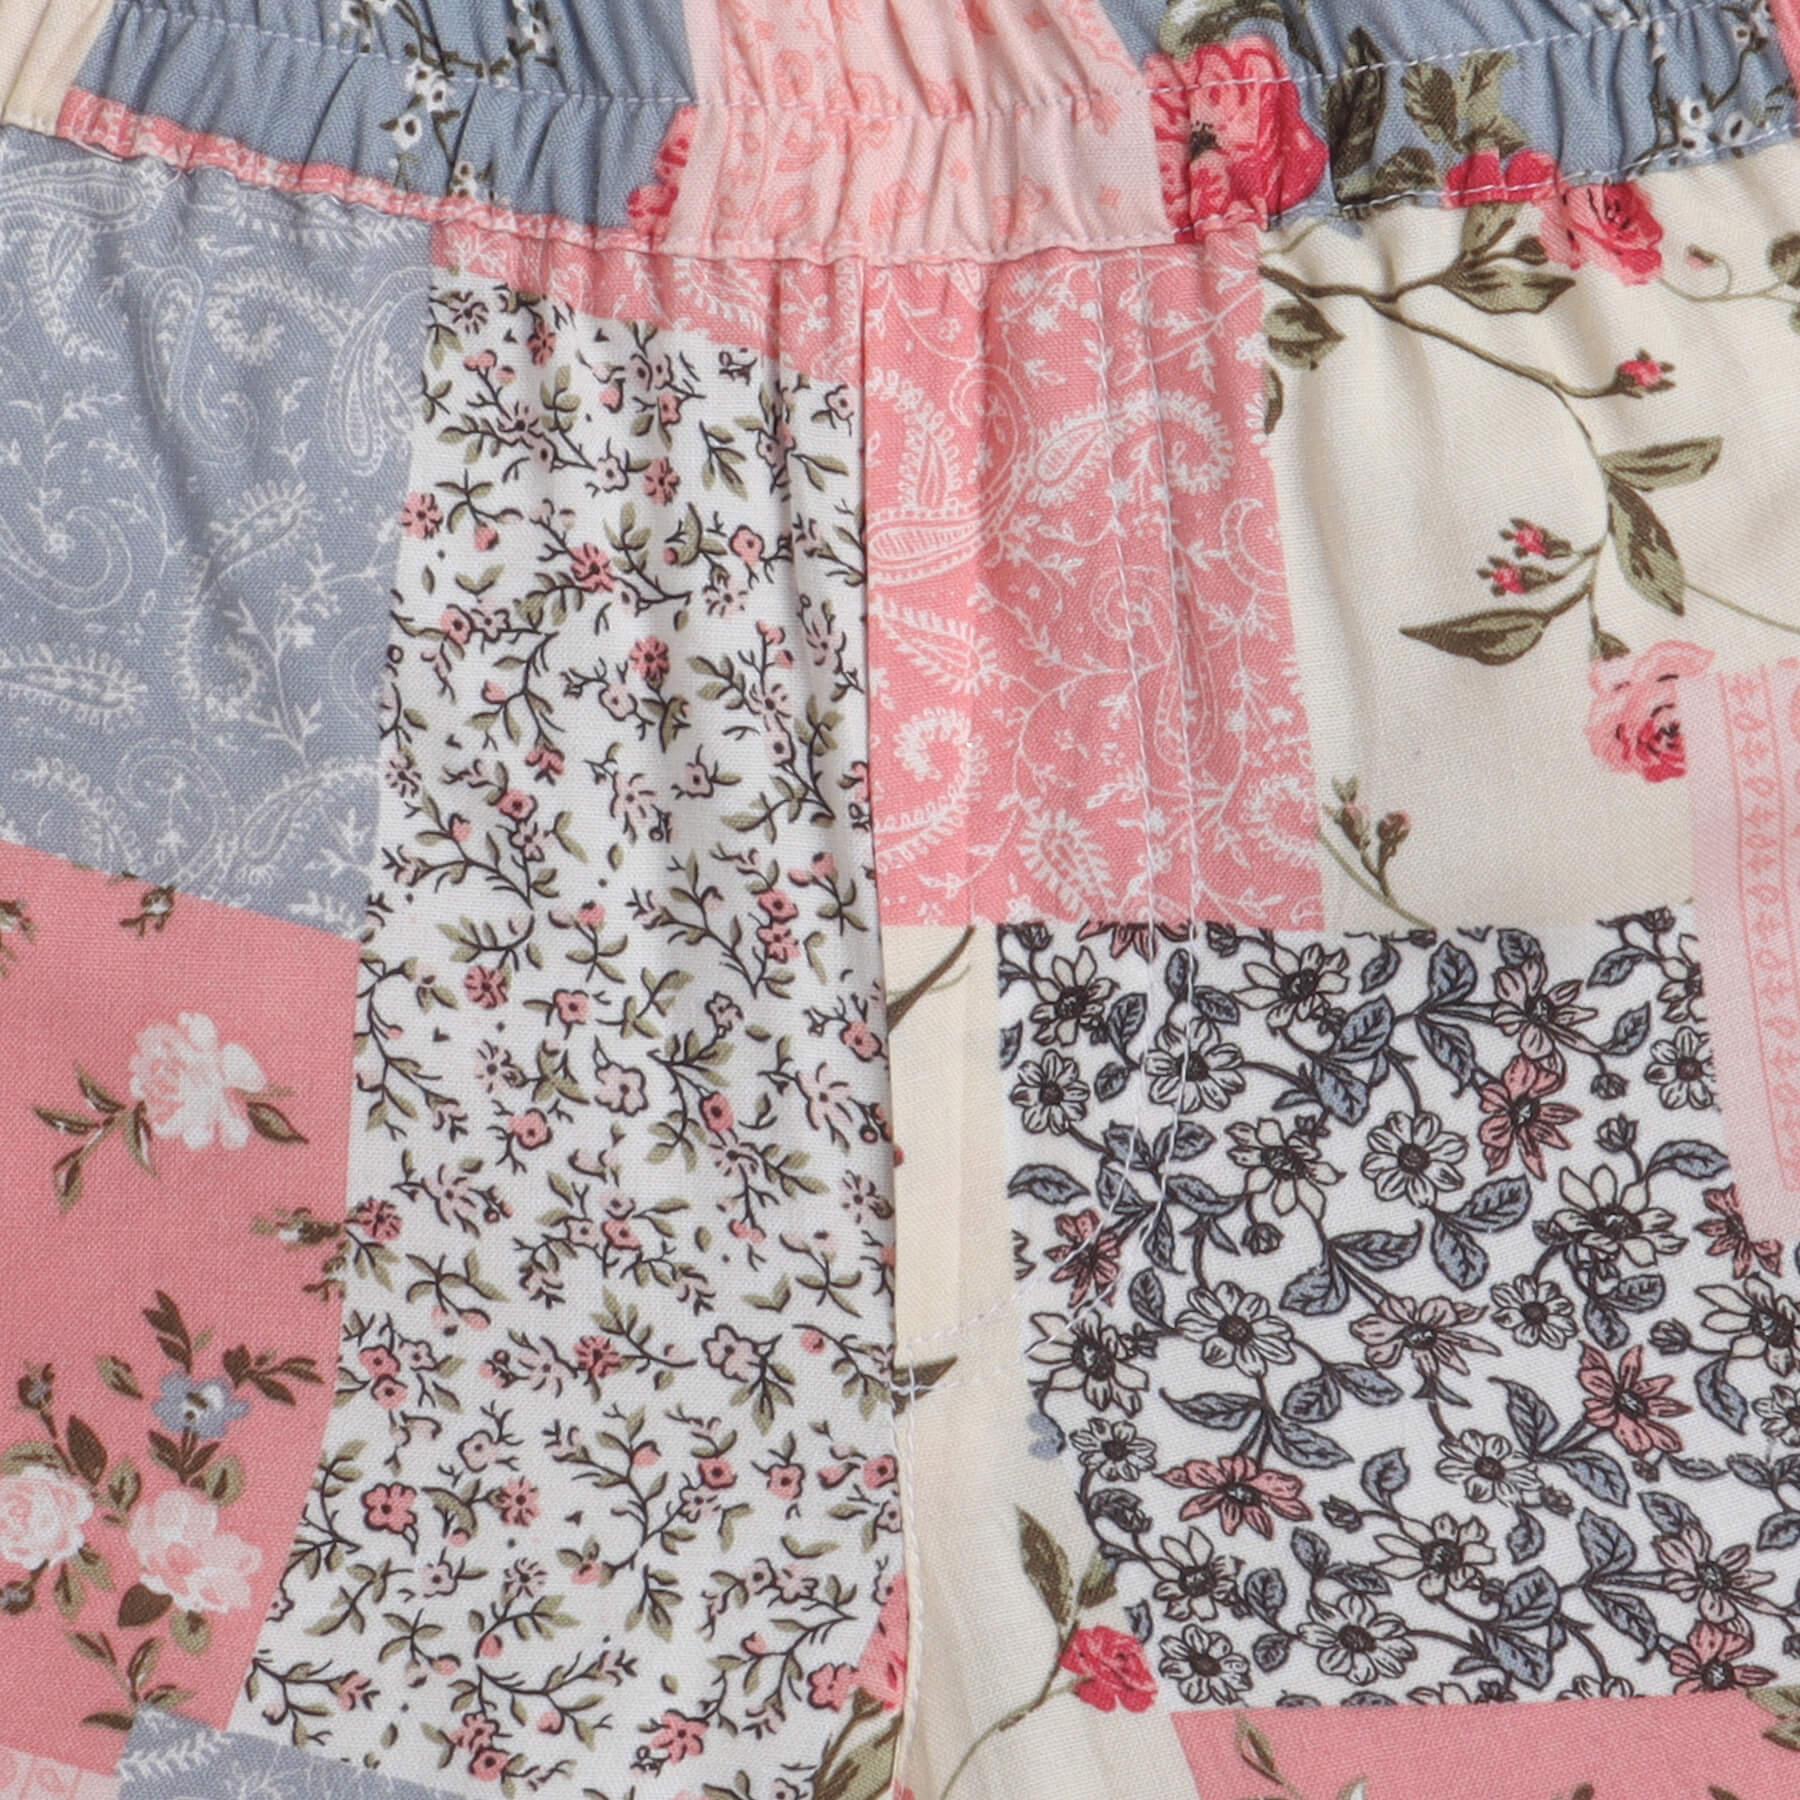 patch work printed shorts